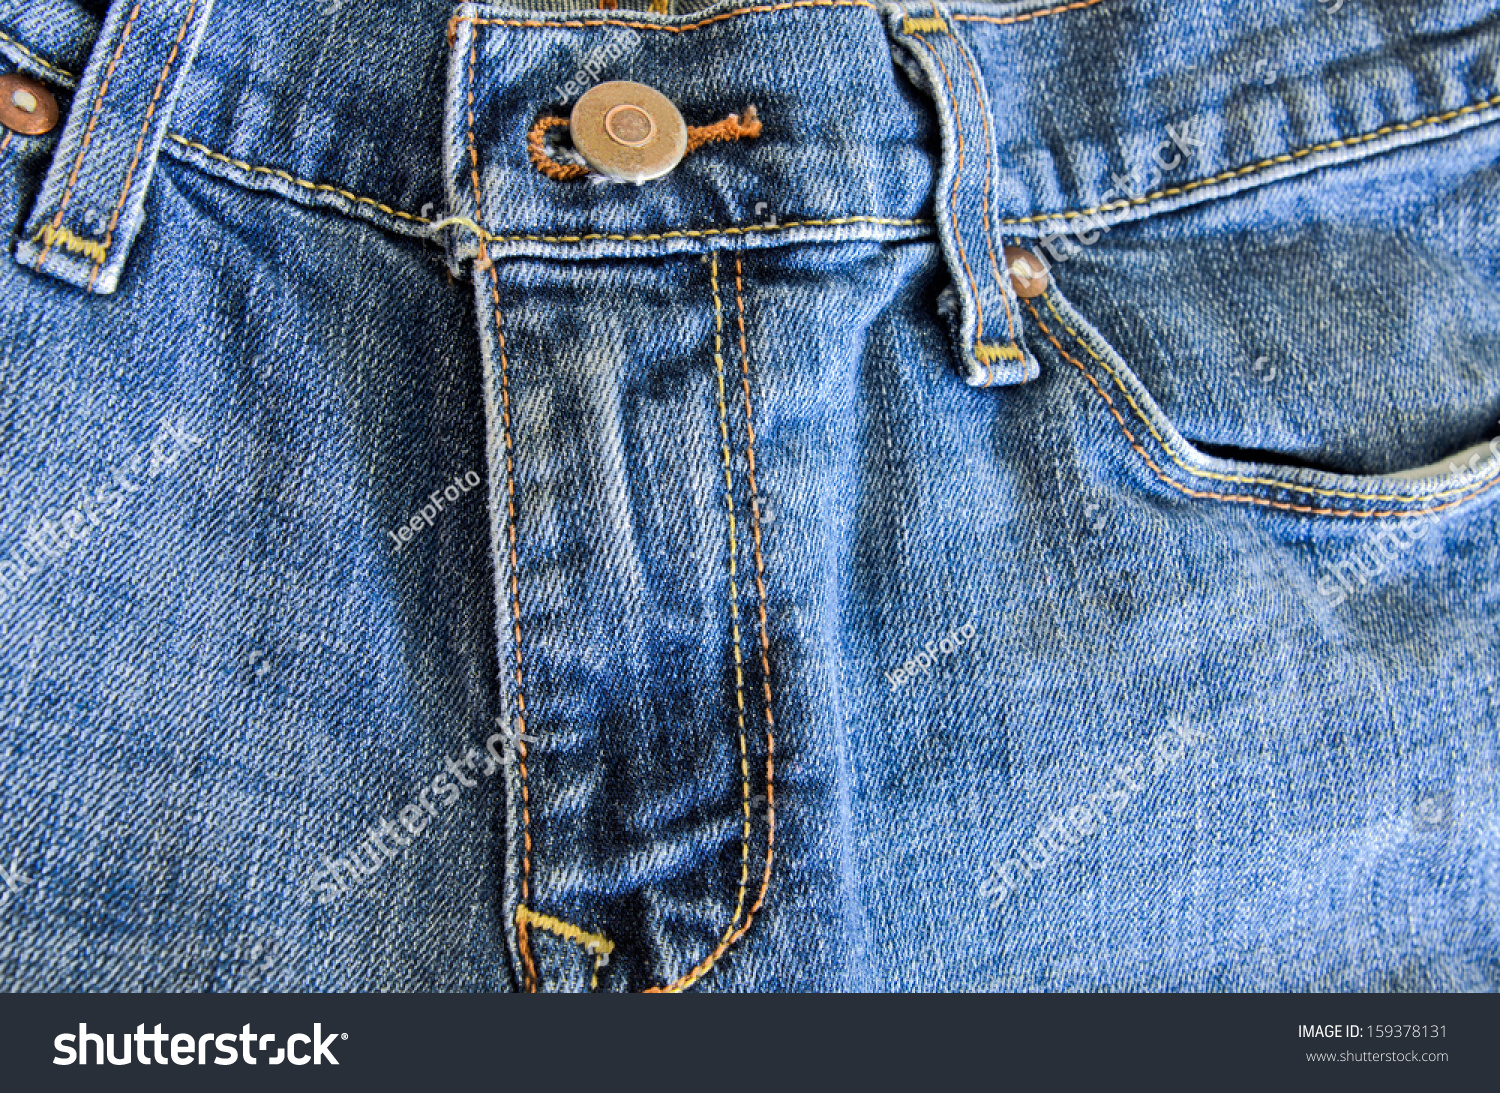 Close Up Texture Of Blue Jeans, Zipper And Button Part Stock Photo ...